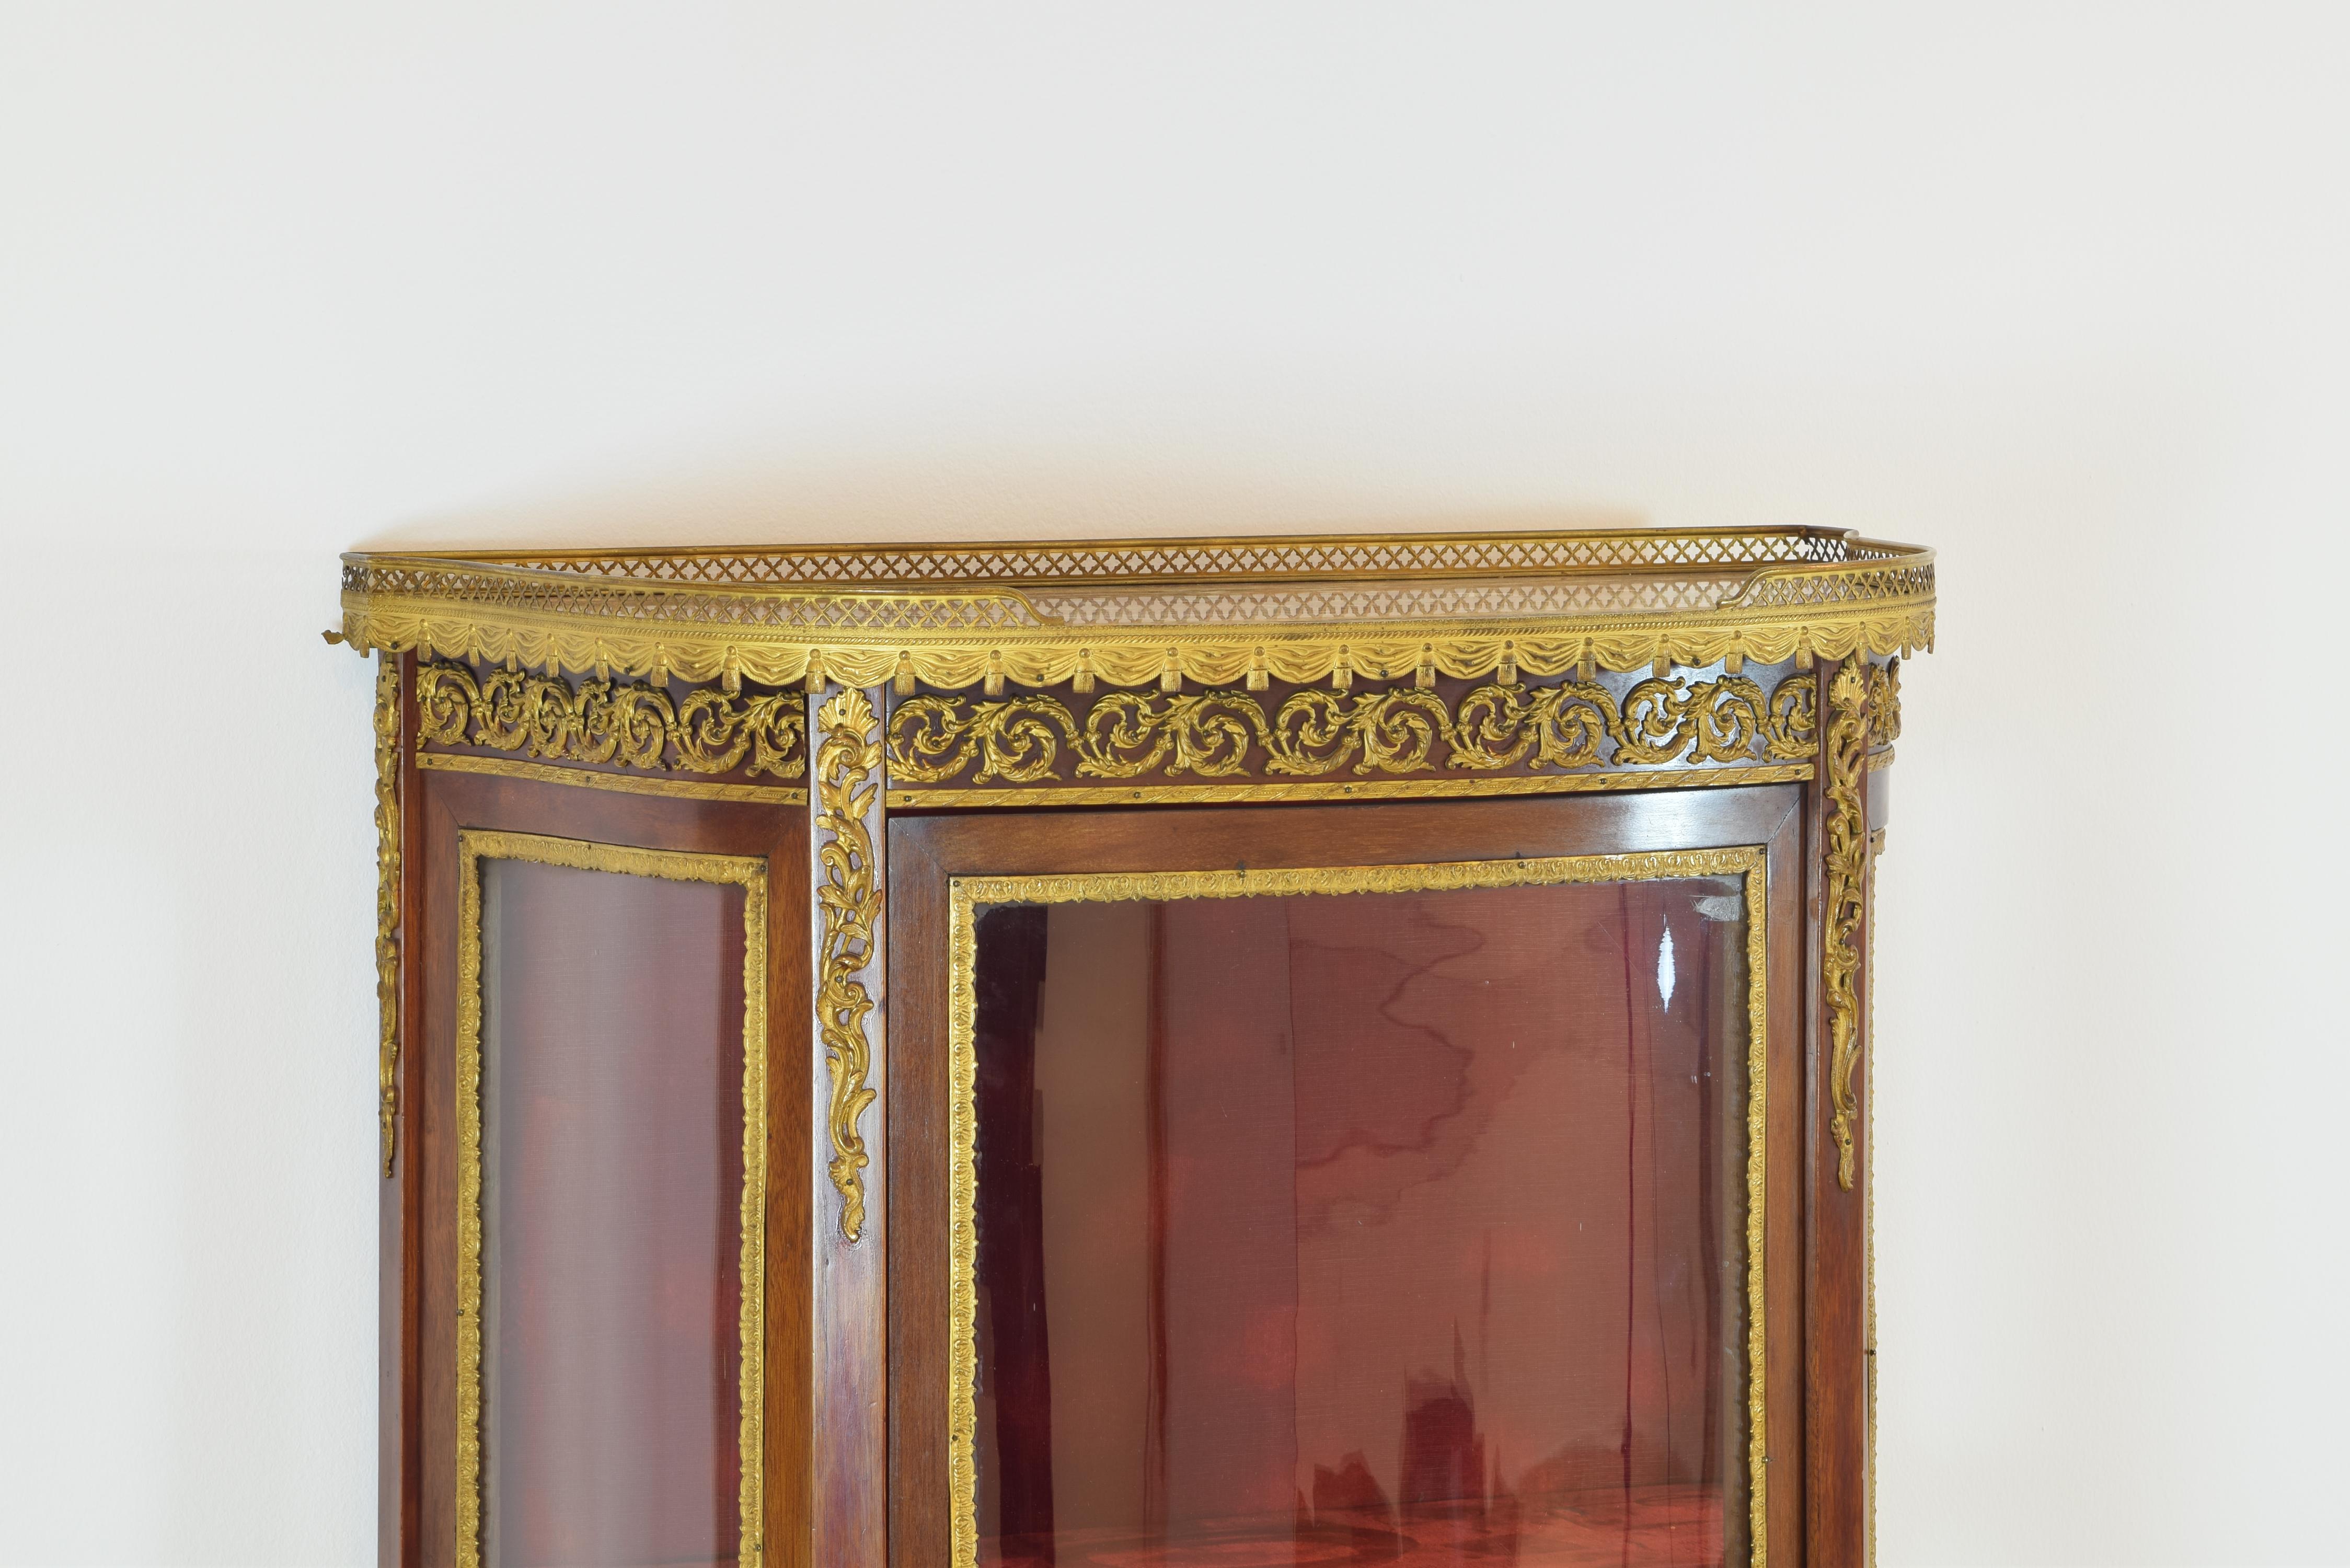 Showcase, France, 19th century.
Clear glass, mahogany wood, gold metal, marble.
Showcase with front and sides with transparent glass sheets that opens with a key on the front panel and has two shelves inside, creating three spaces in this